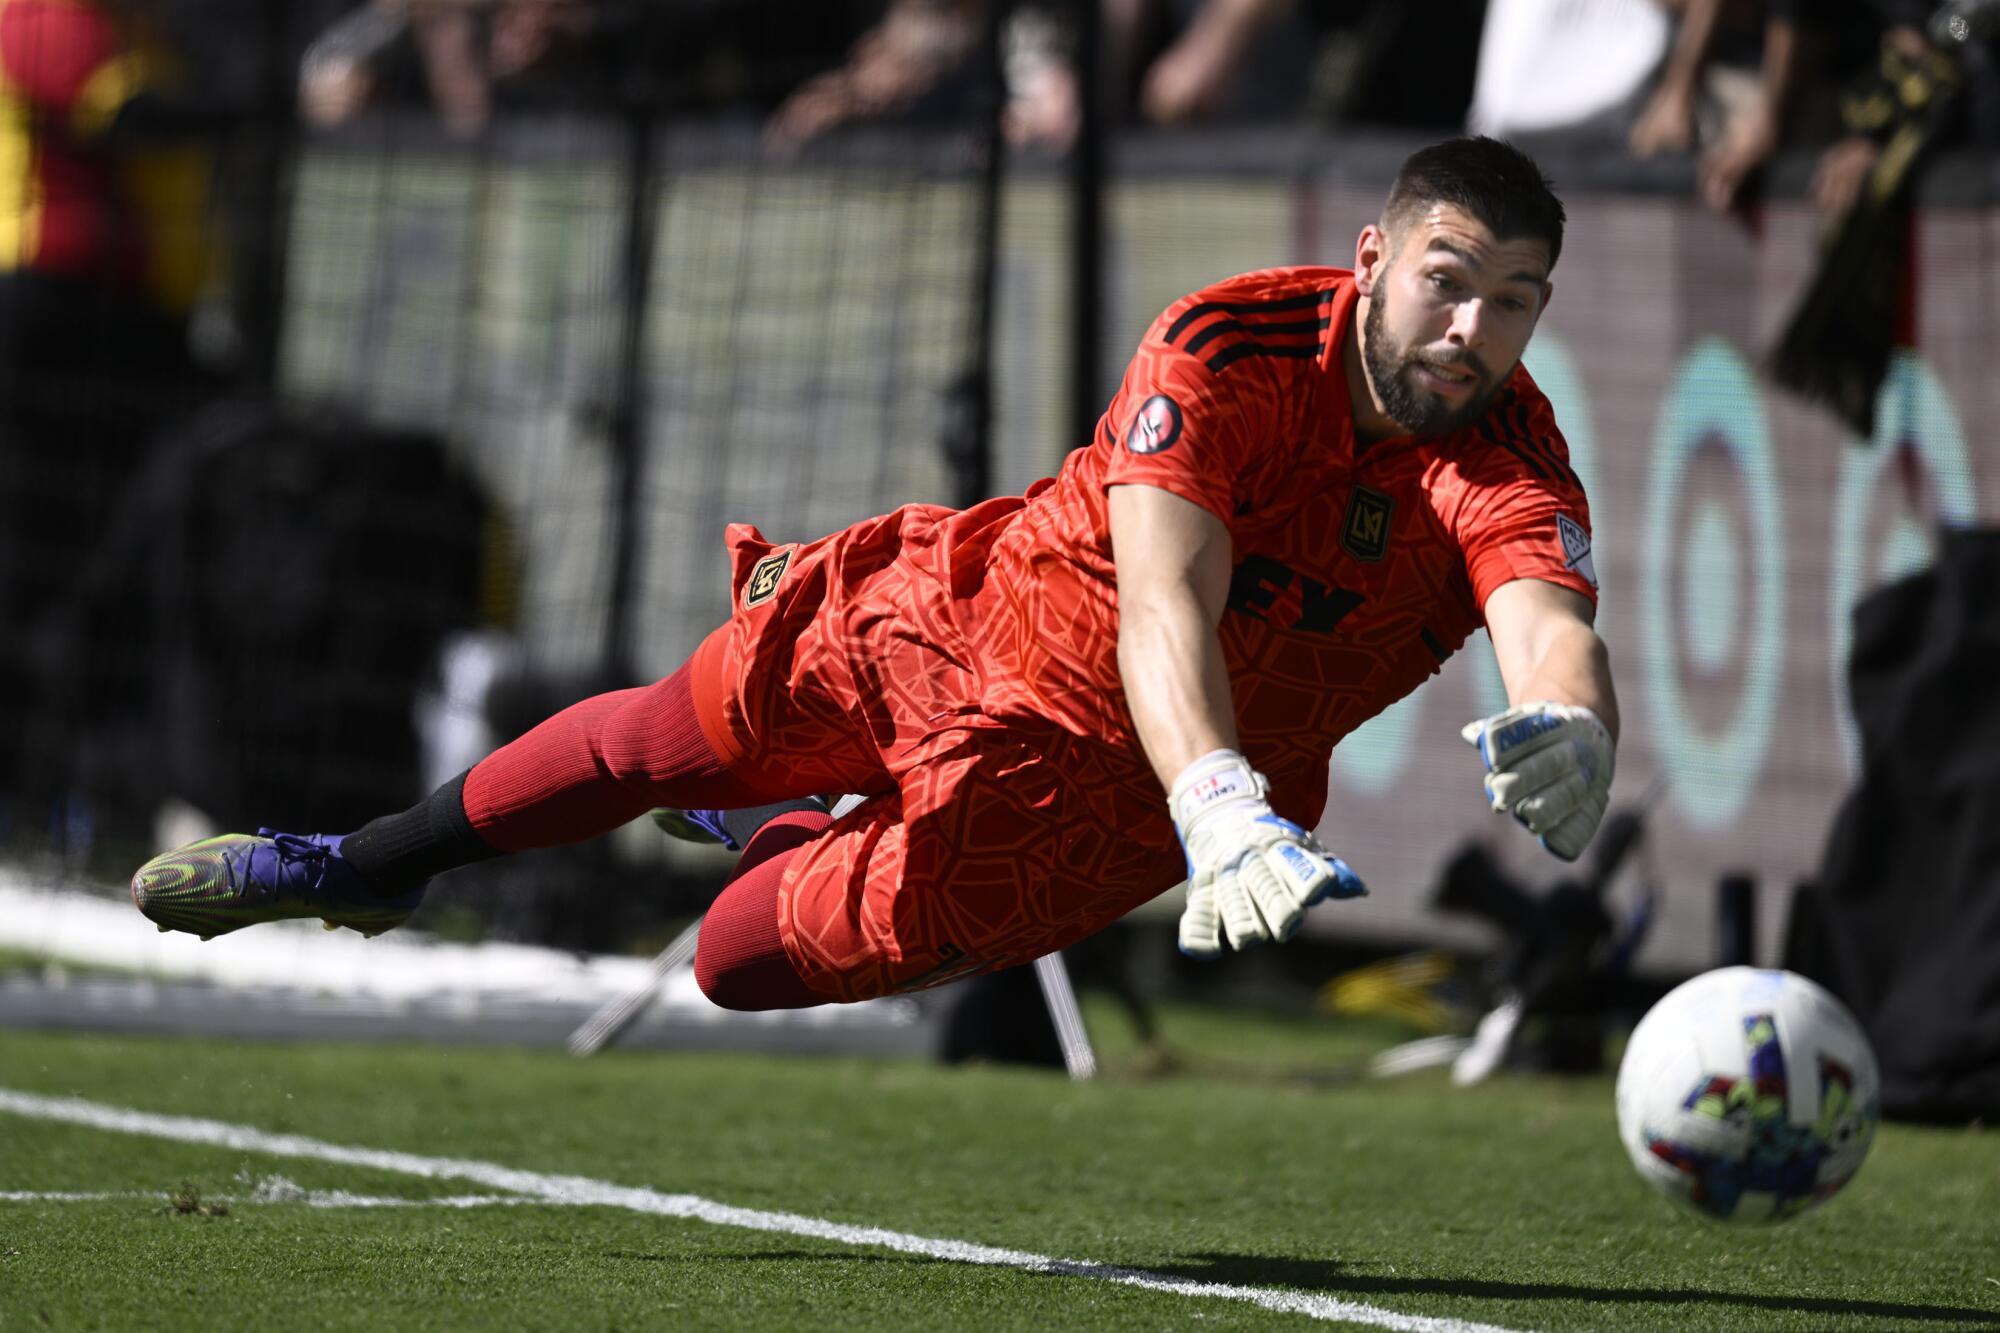 LAFC goalkeeper Maxime Crepeau stretches out his body to the left of the goal and blocks a shot 